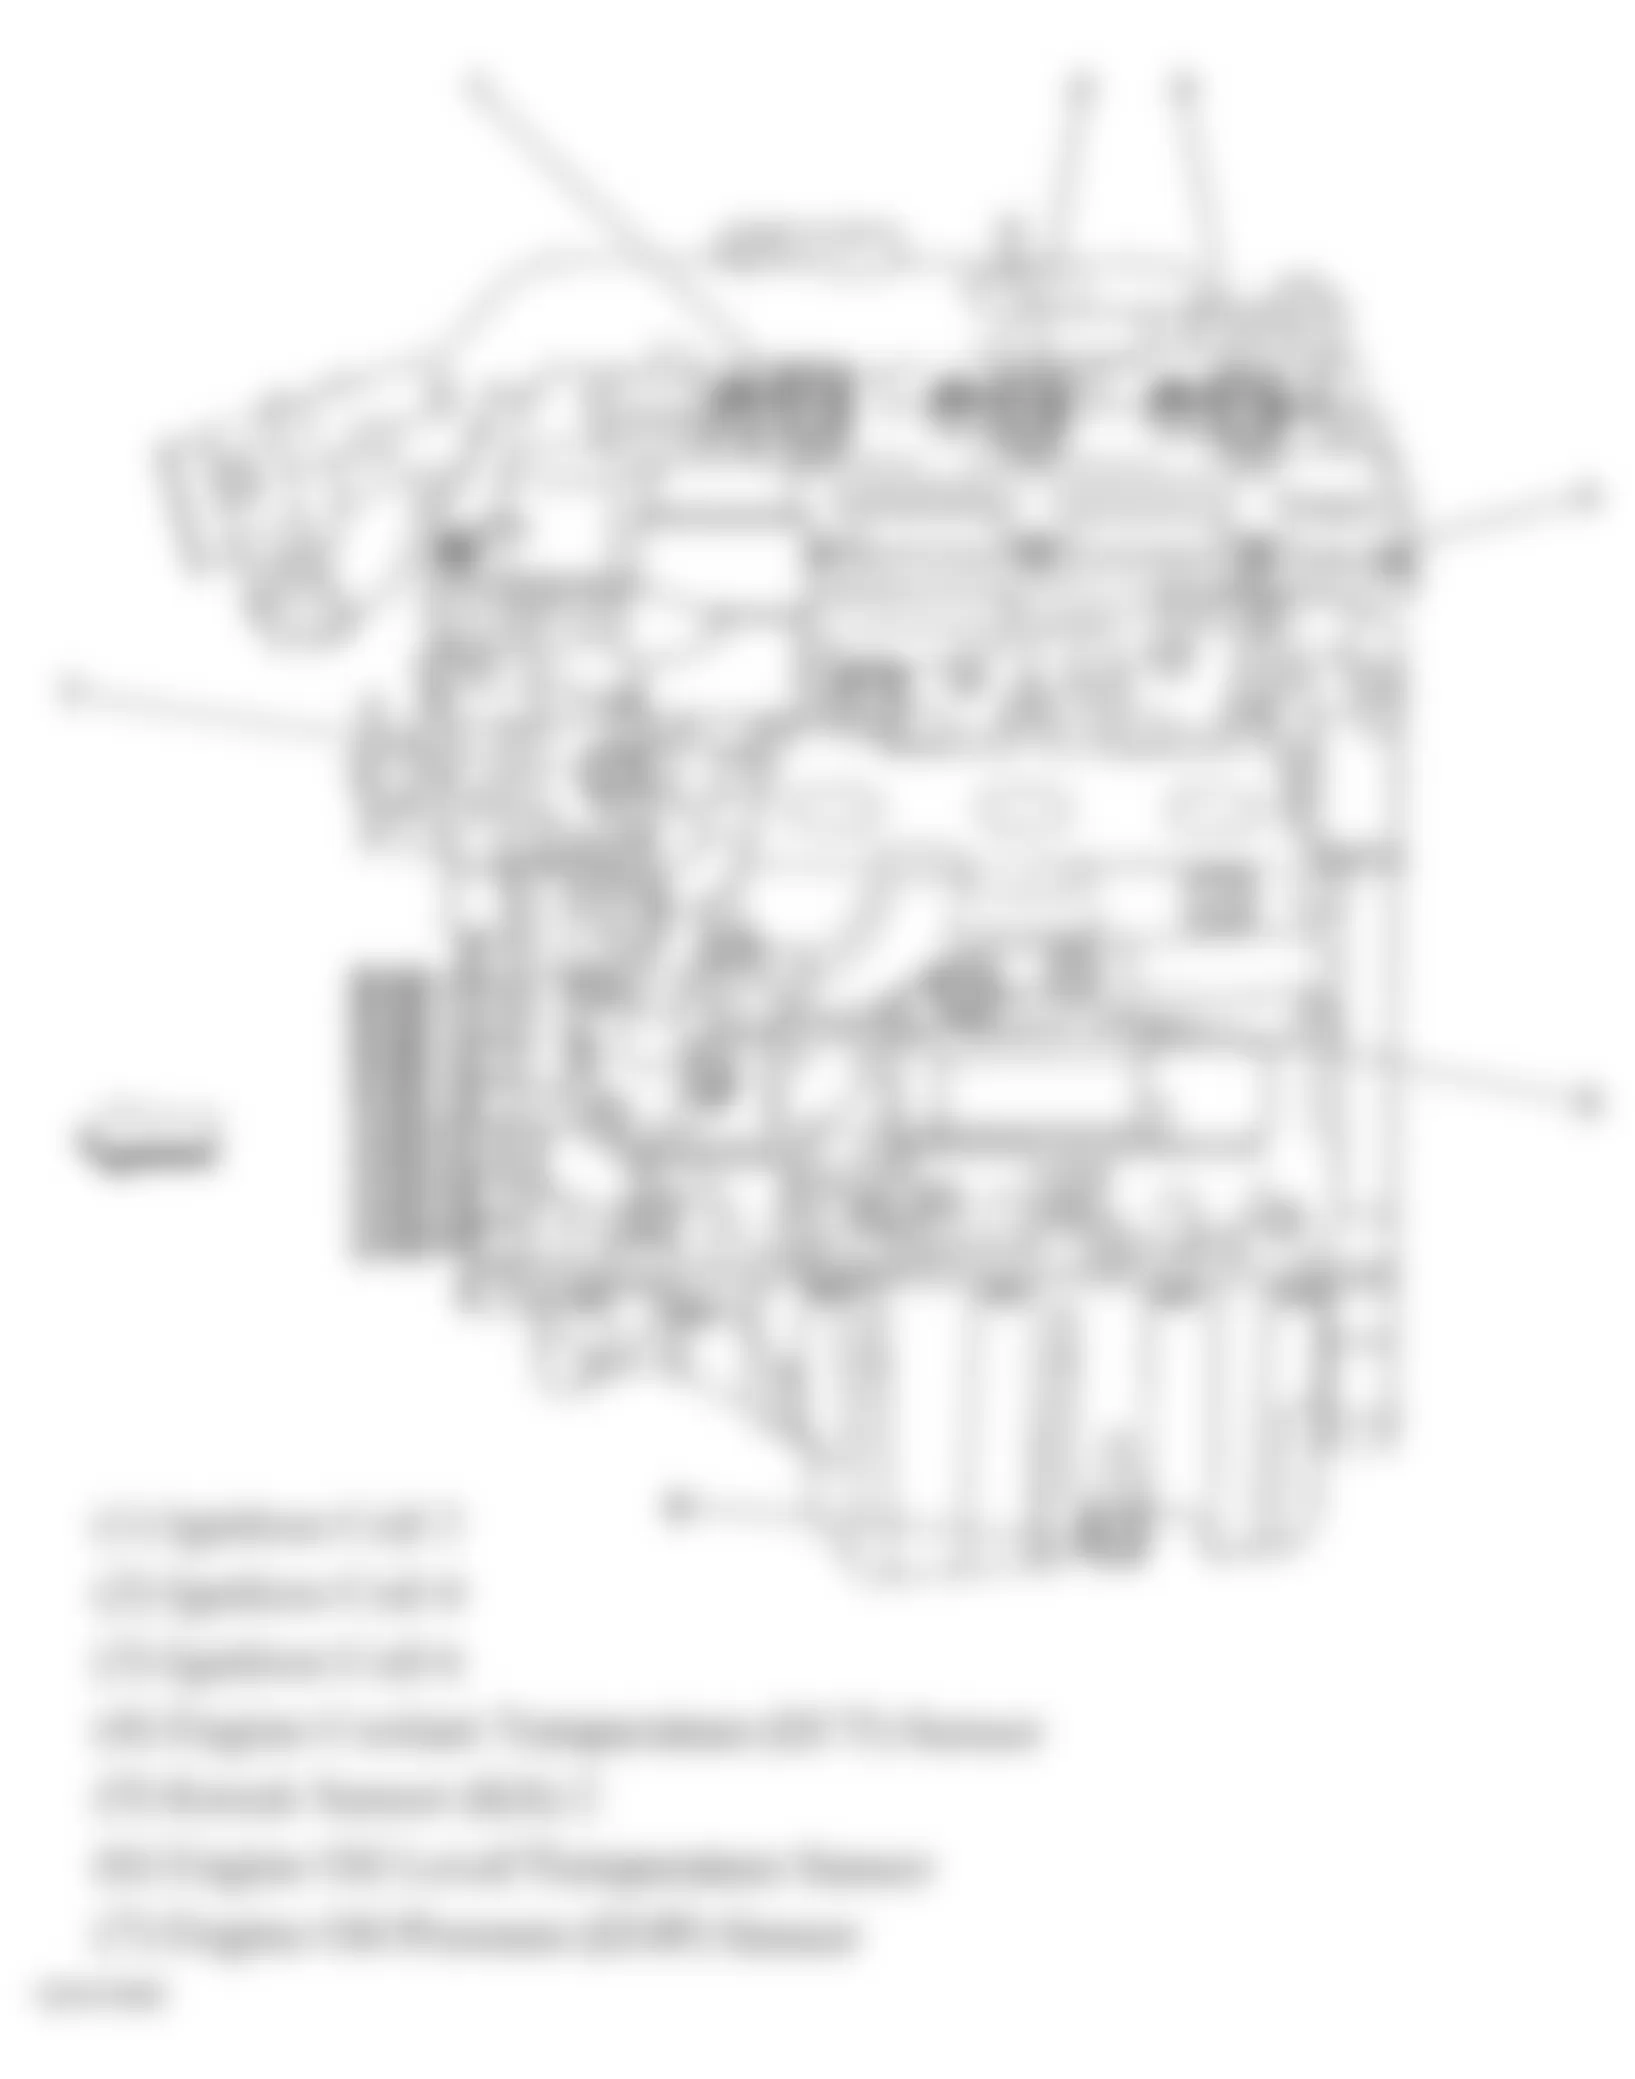 Buick LaCrosse CXL 2008 - Component Locations -  Left Side Of Engine (3.6L)